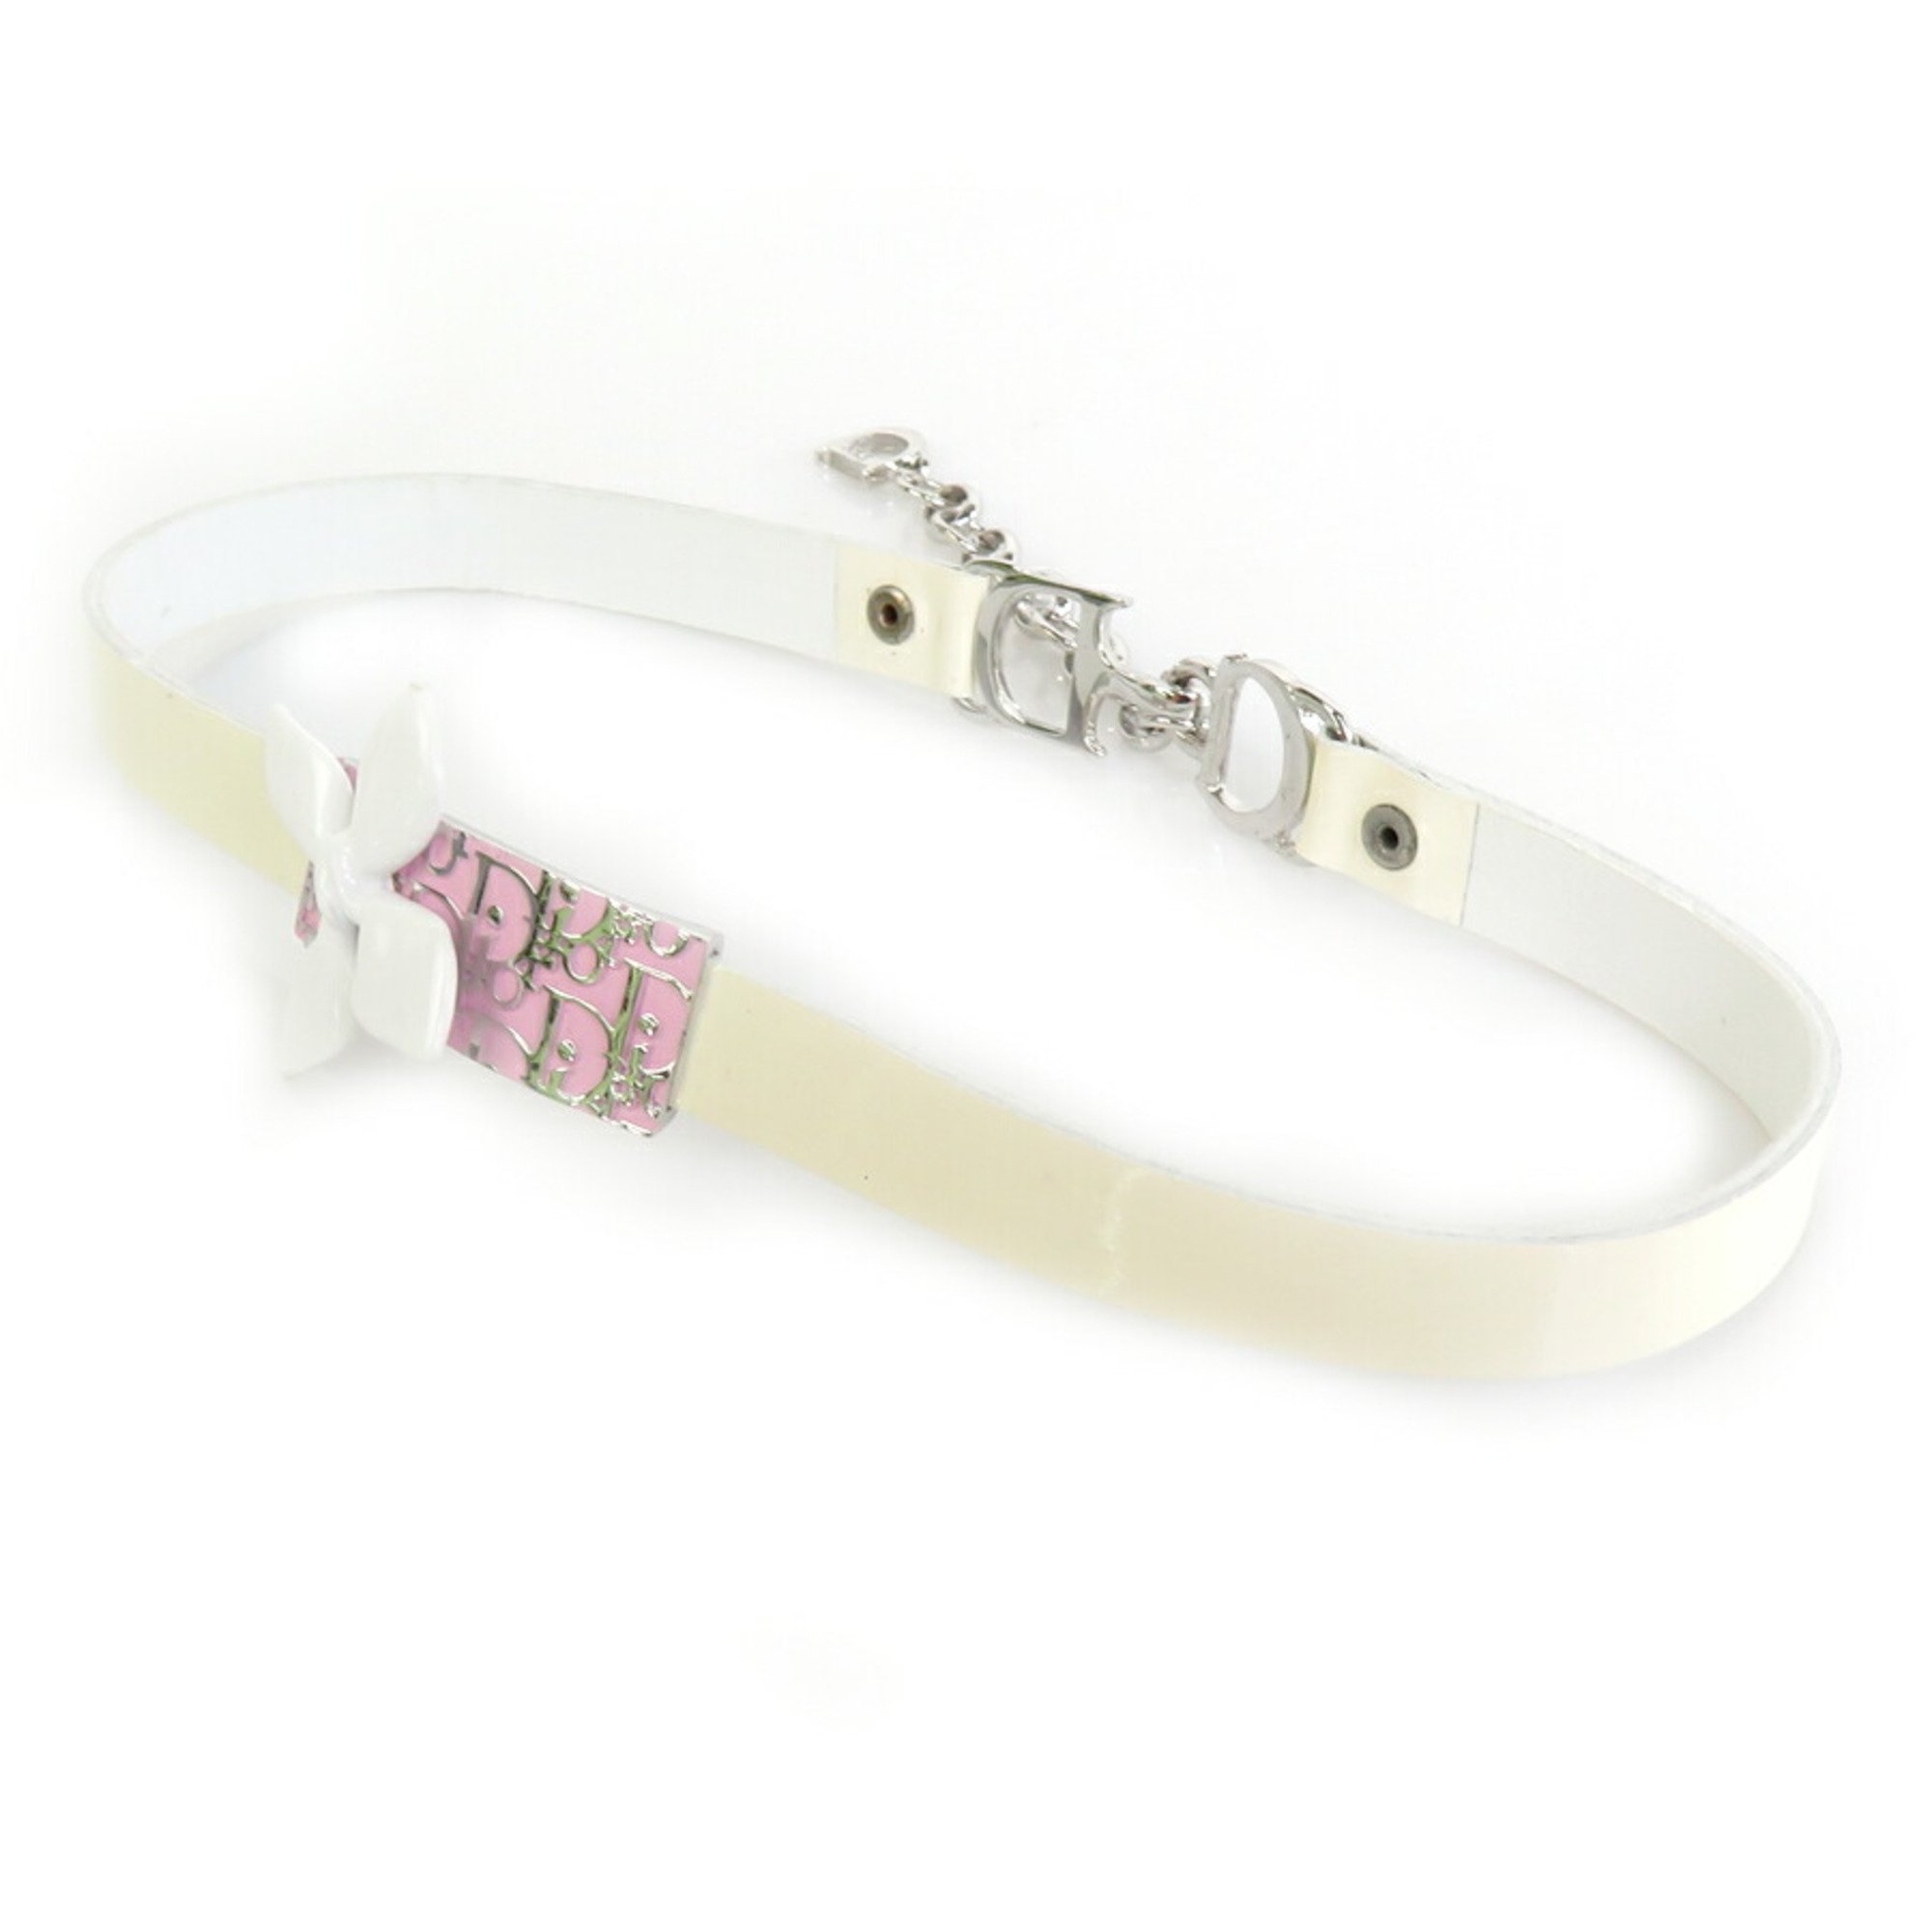 Christian Dior Choker Necklace Trotter Flower Leather/Metal Off-White/Pink/Silver Women's e55784f